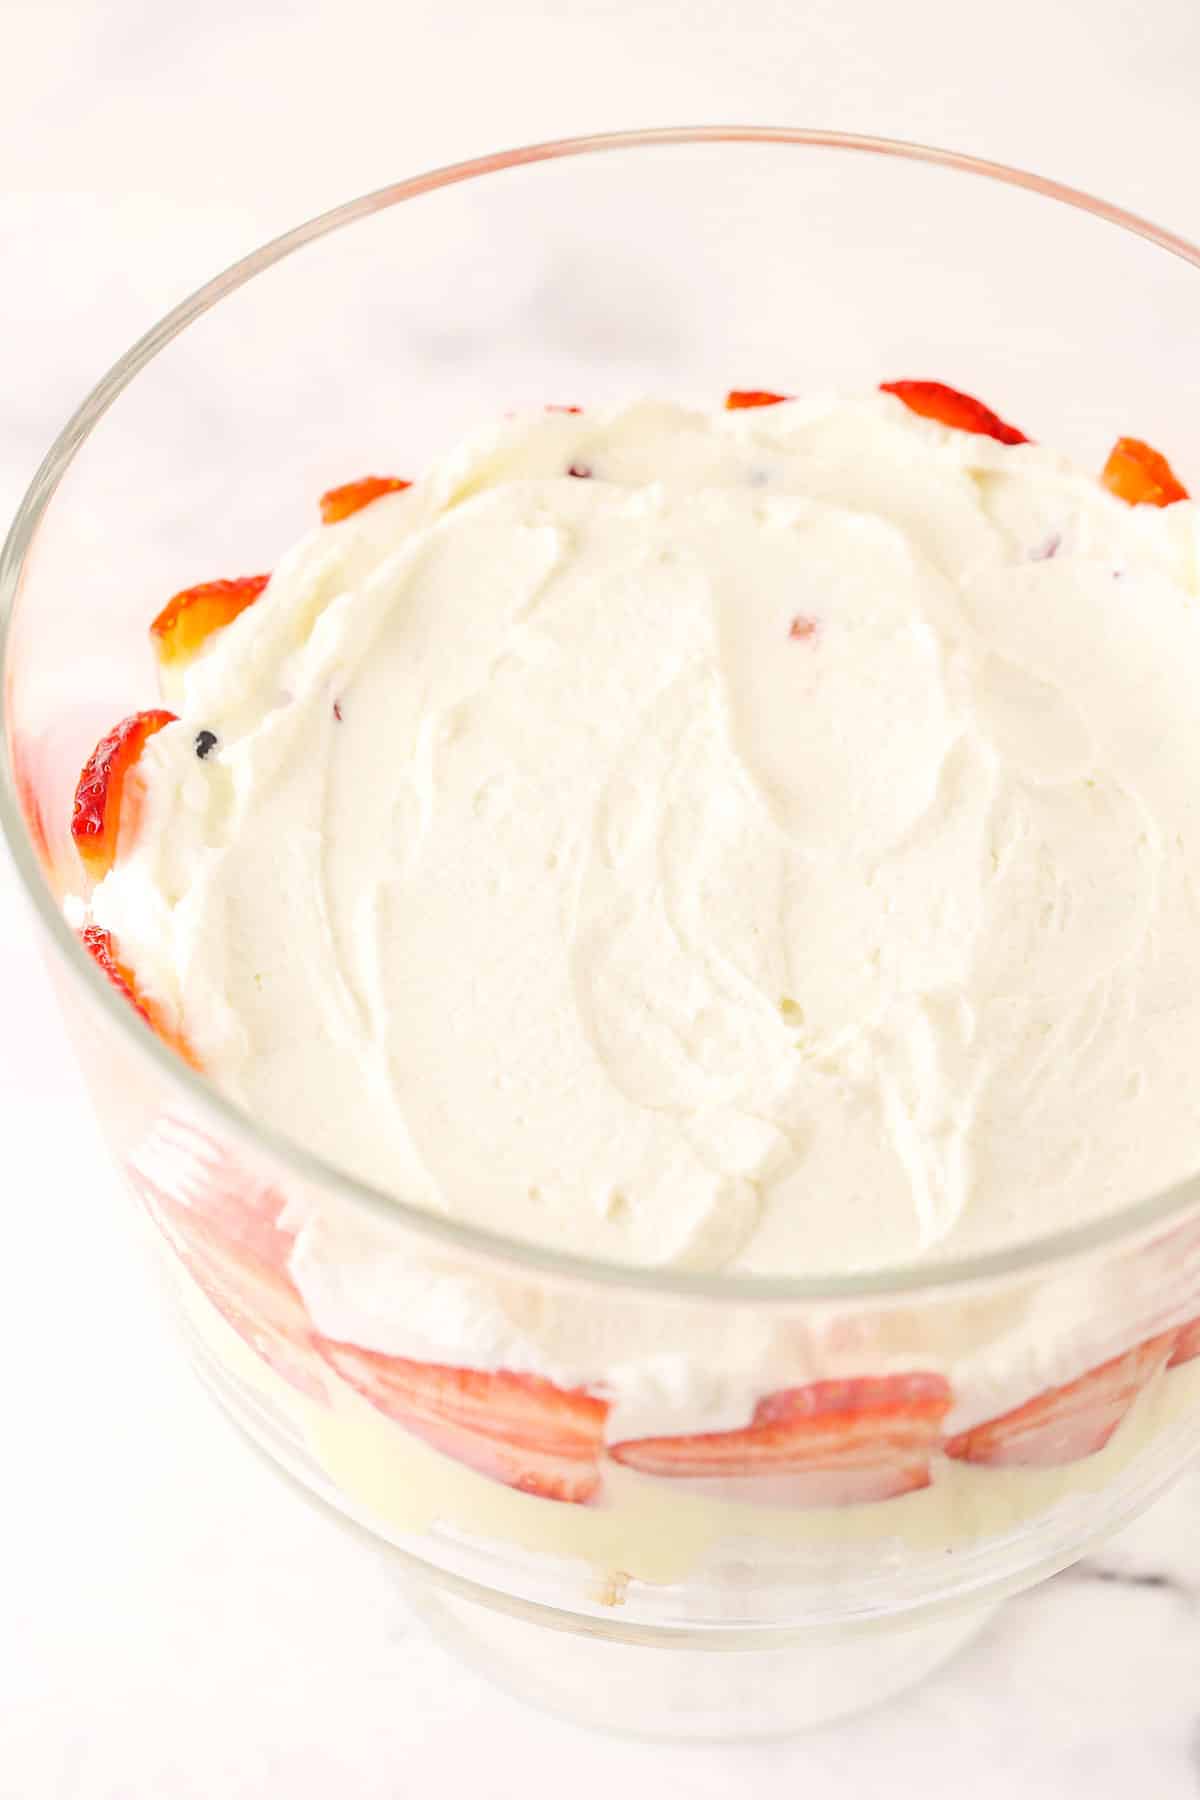 Overhead view of whipped cream being added on top of trifle berries layer.